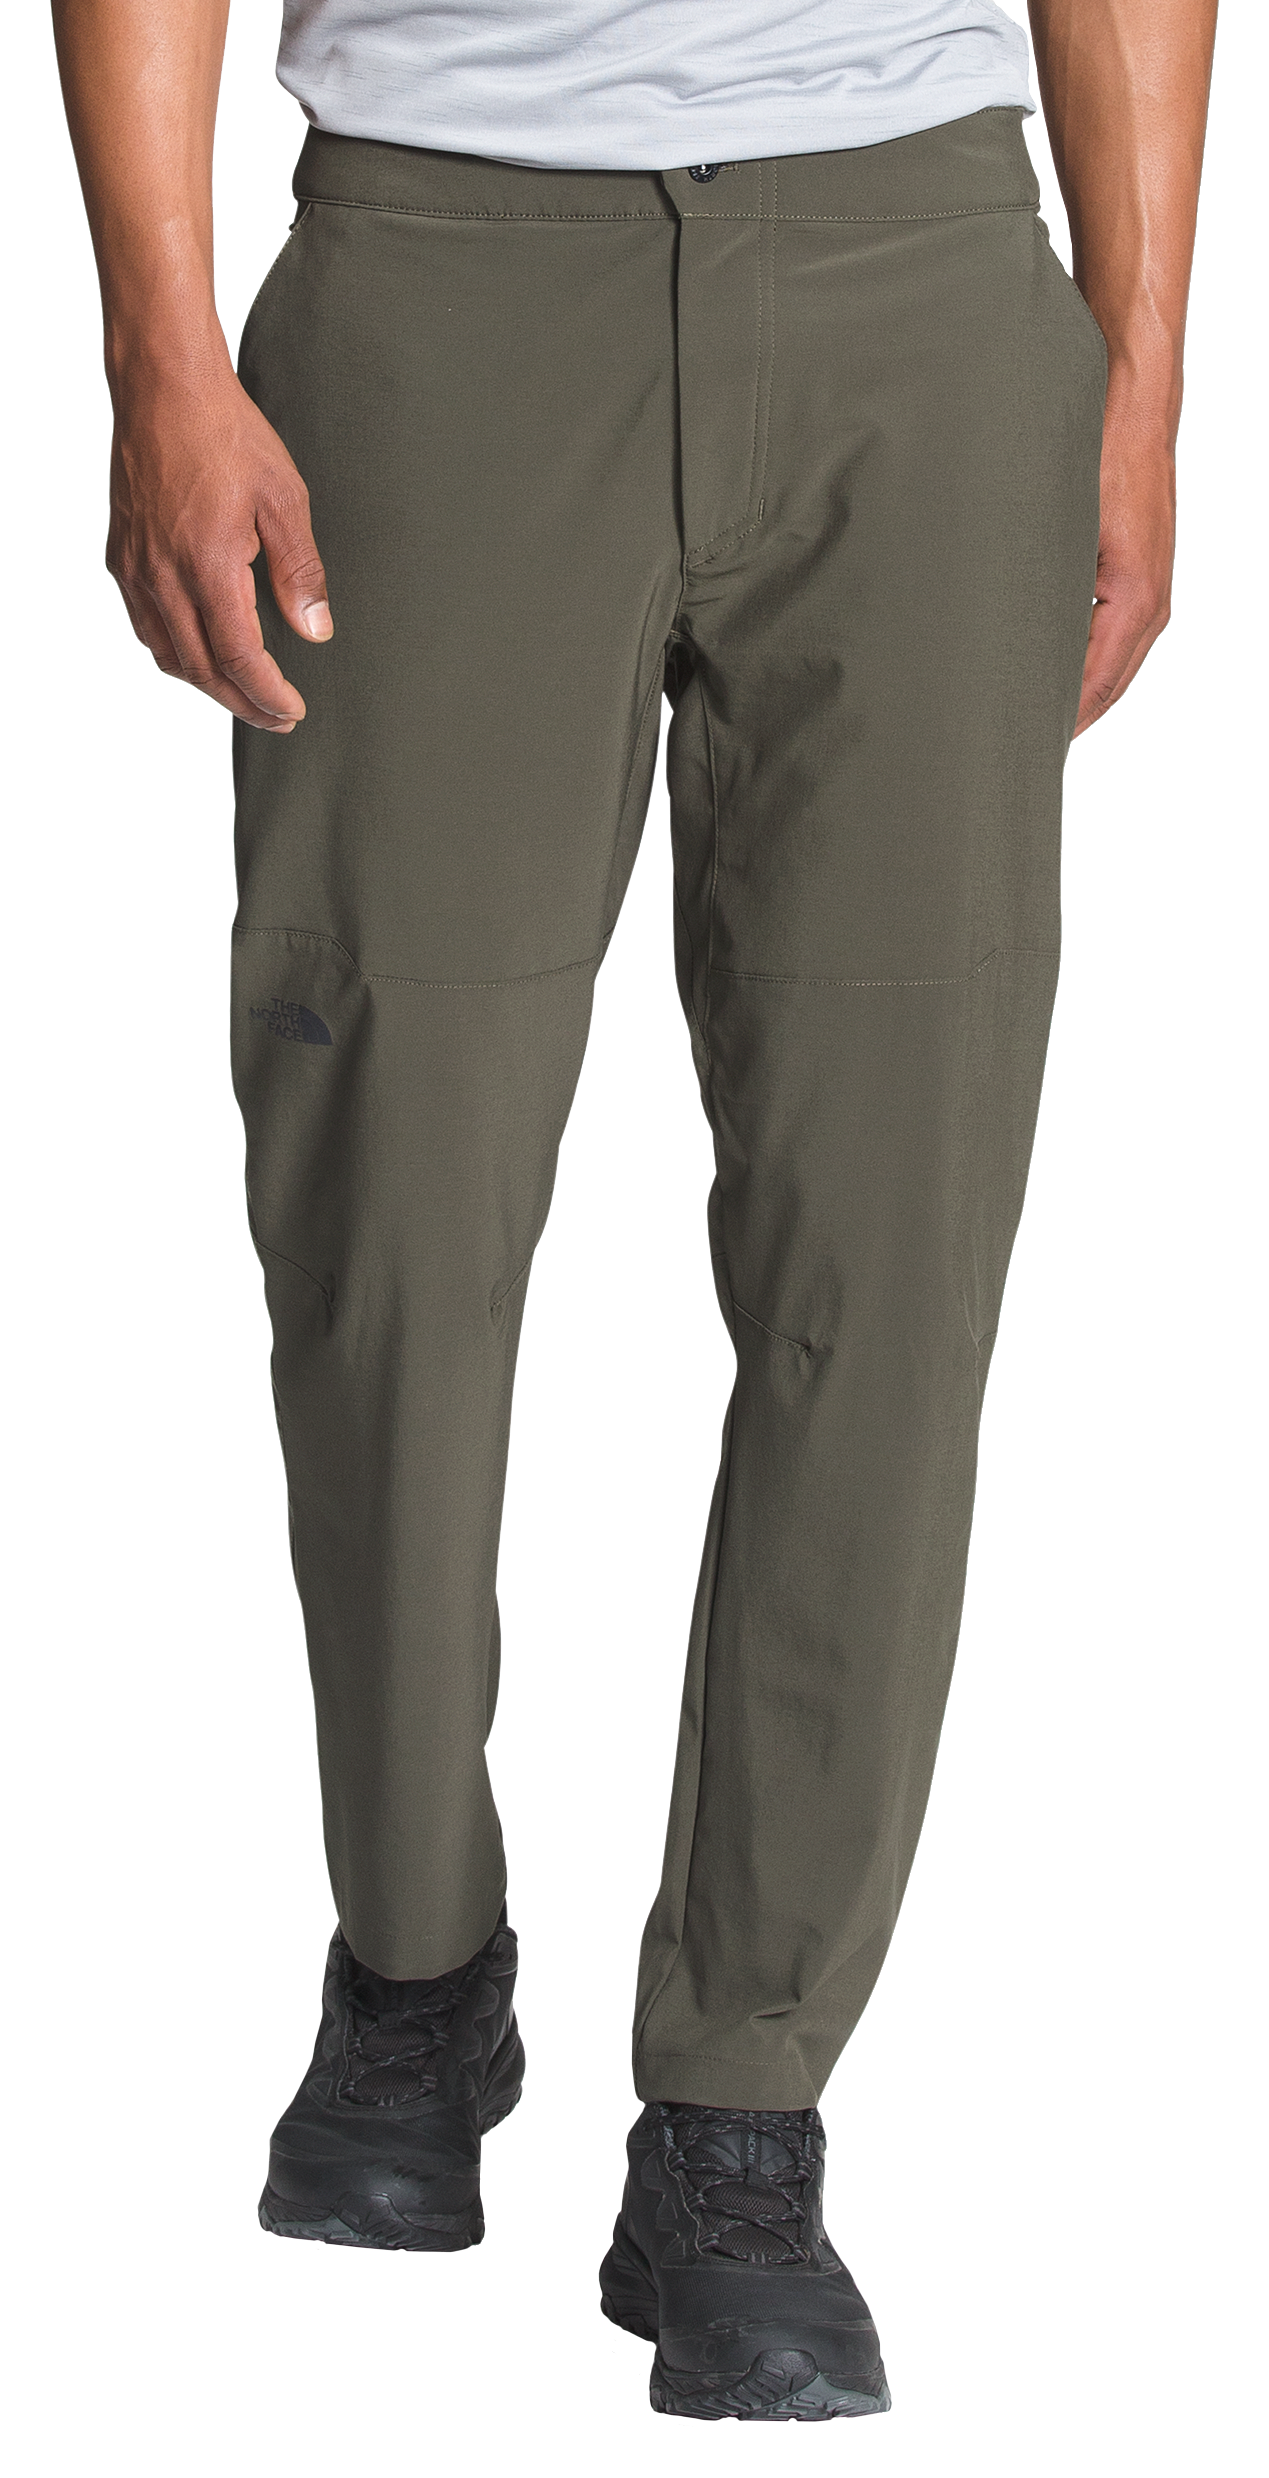 The North Face Paramount Active Pants for Men - New Taupe Green/New Taupe Green - 34 - Long